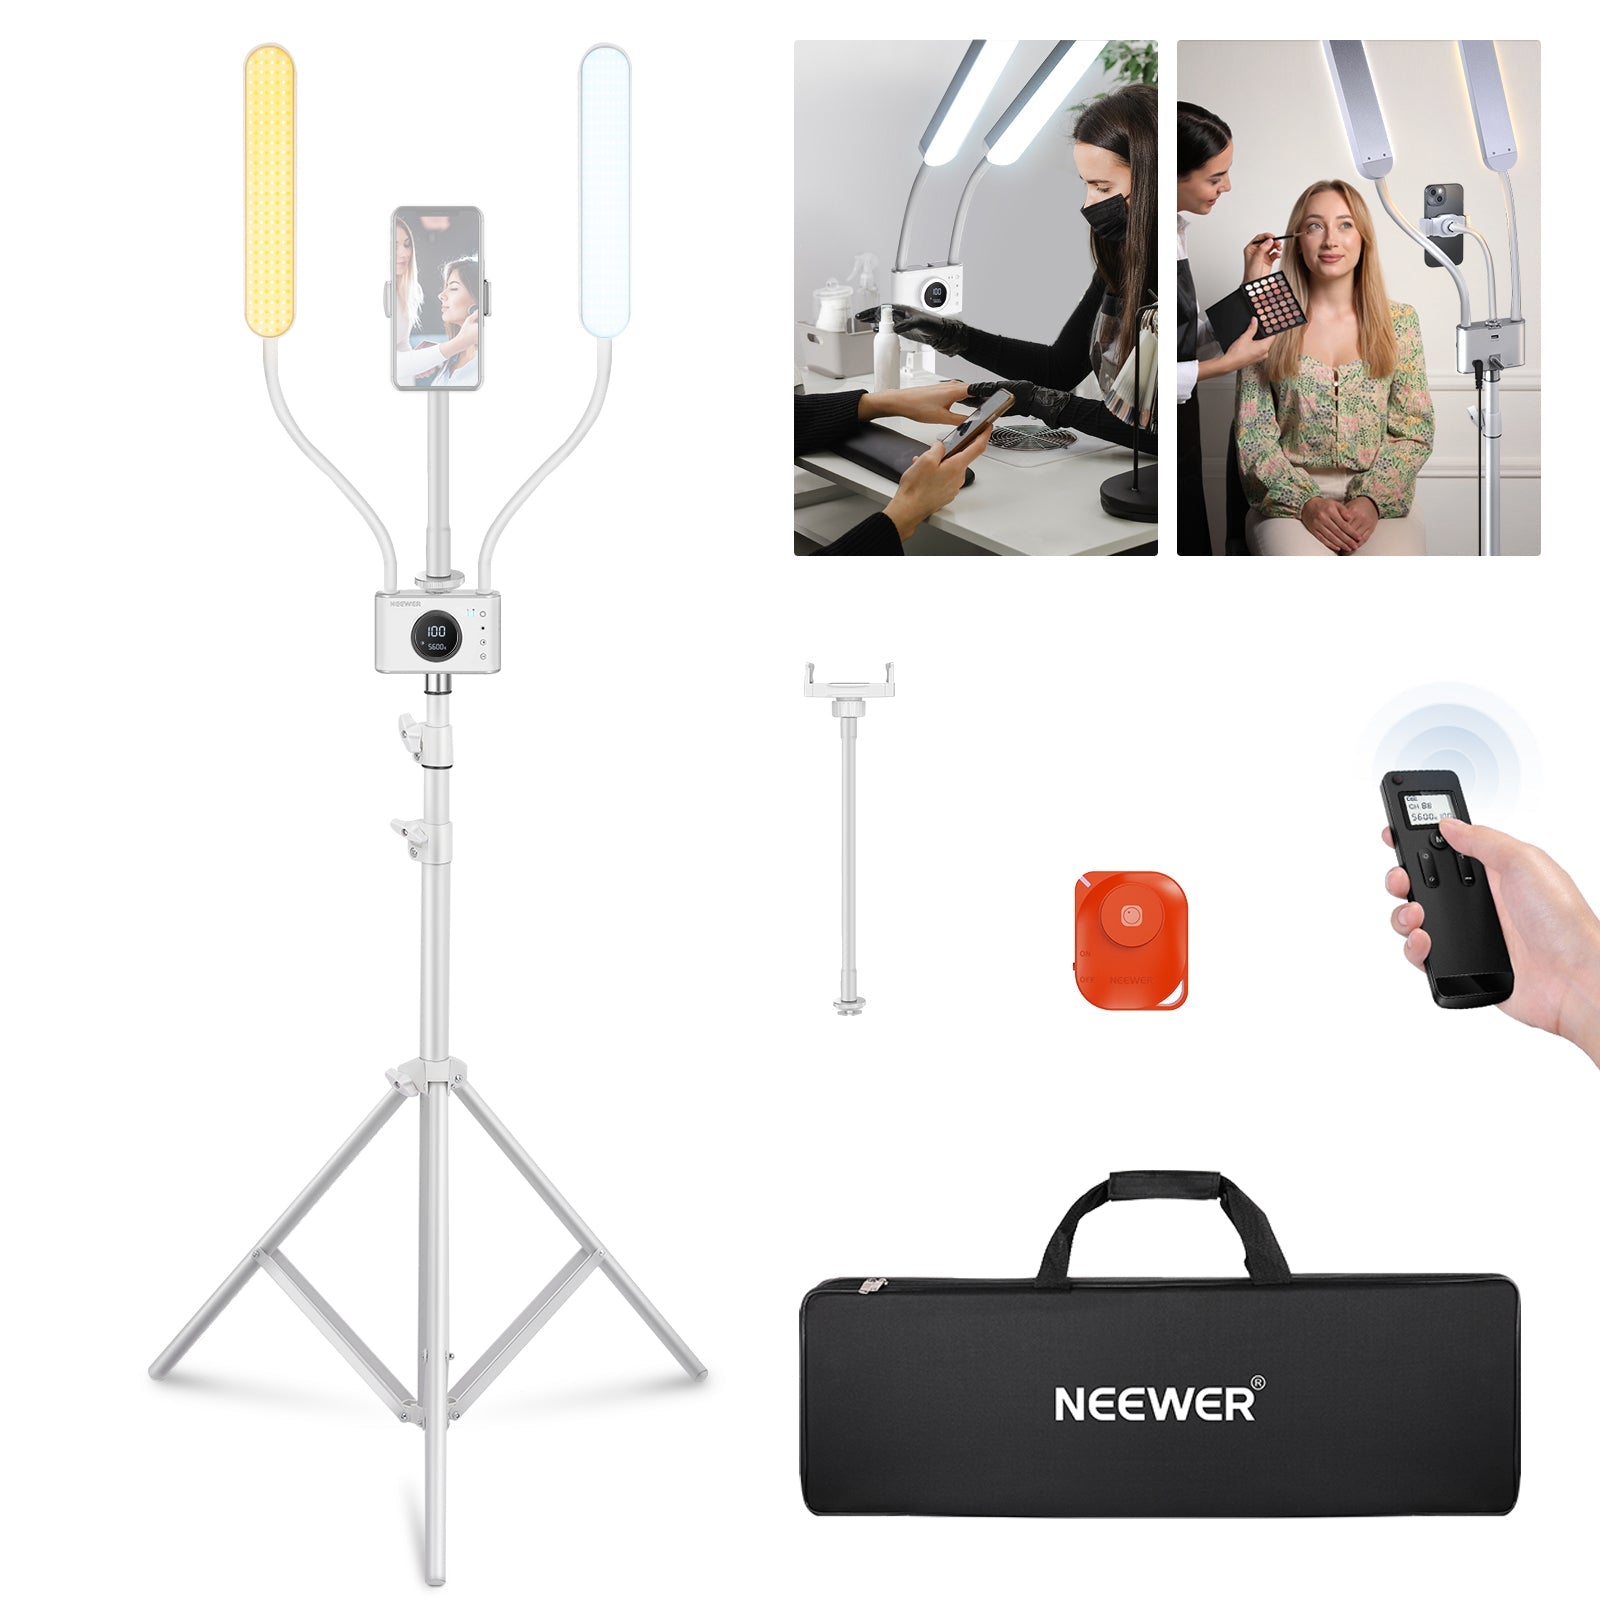 NEEWER 20 CRI 97+ Big Dimmable Bi-color Outdoor Photography Ring